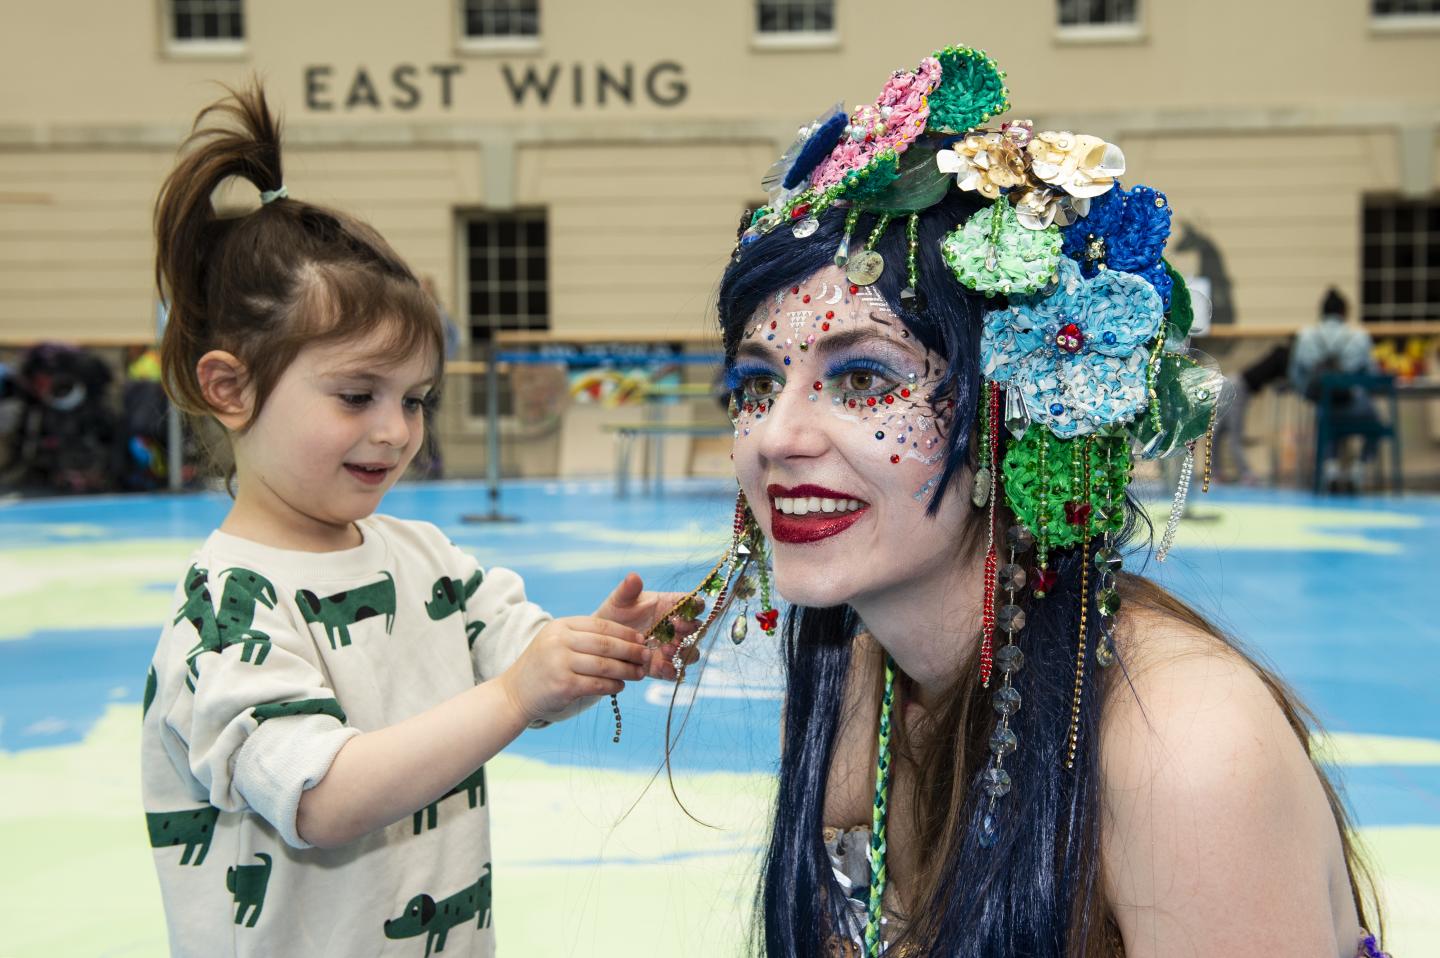 The image shows a child playing with the hair of a woman dressed up as a mermaid.